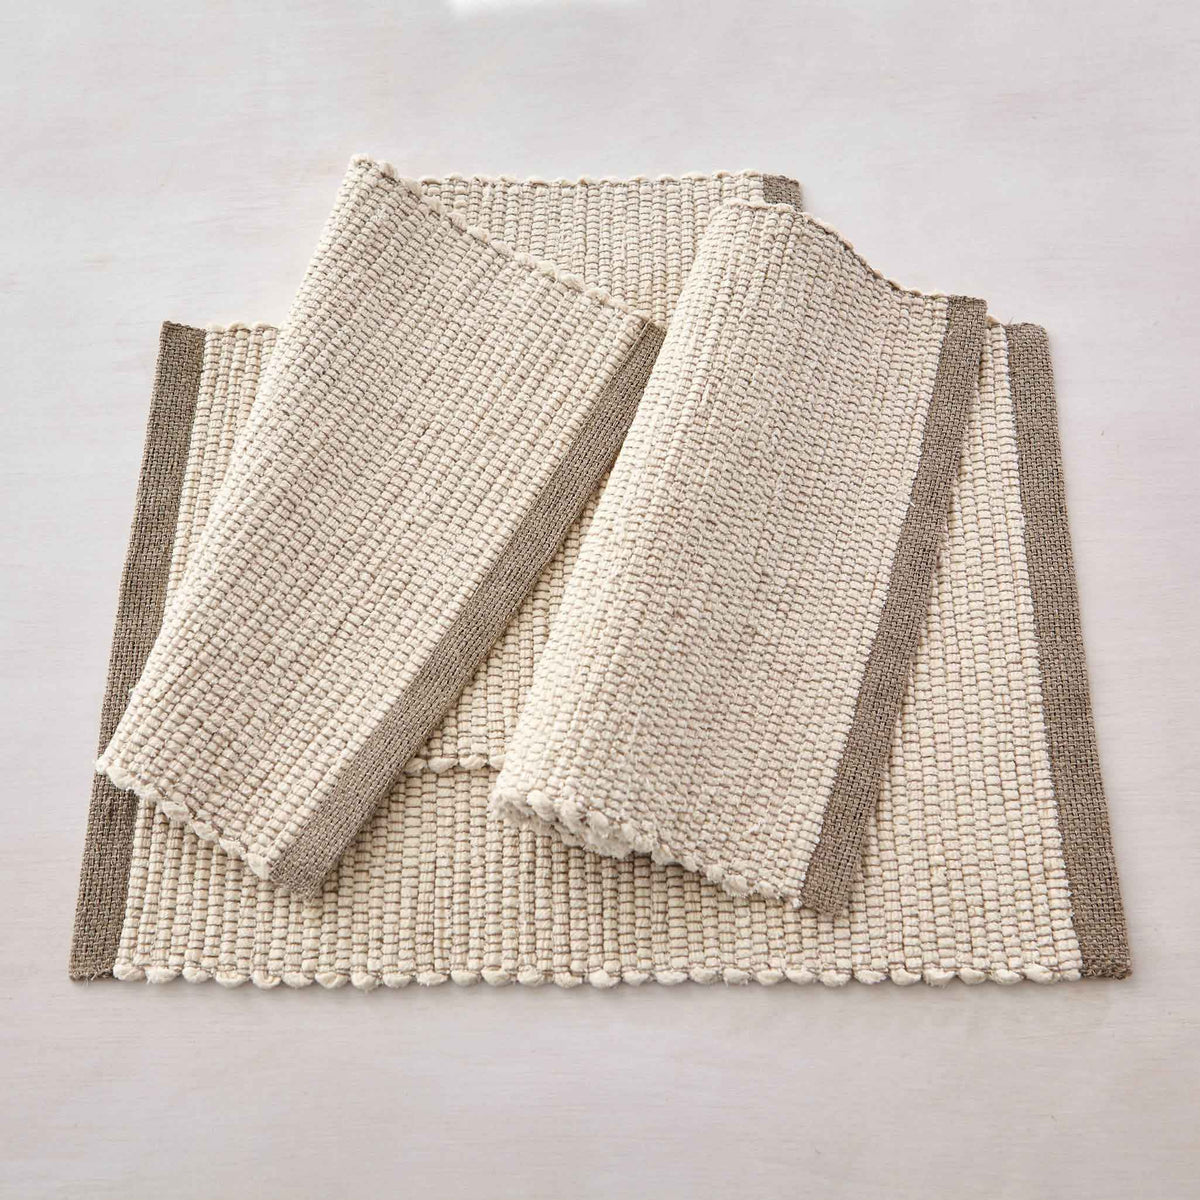 HANDWOVEN LINEN PLACEMAT-OYSTER with FLAX